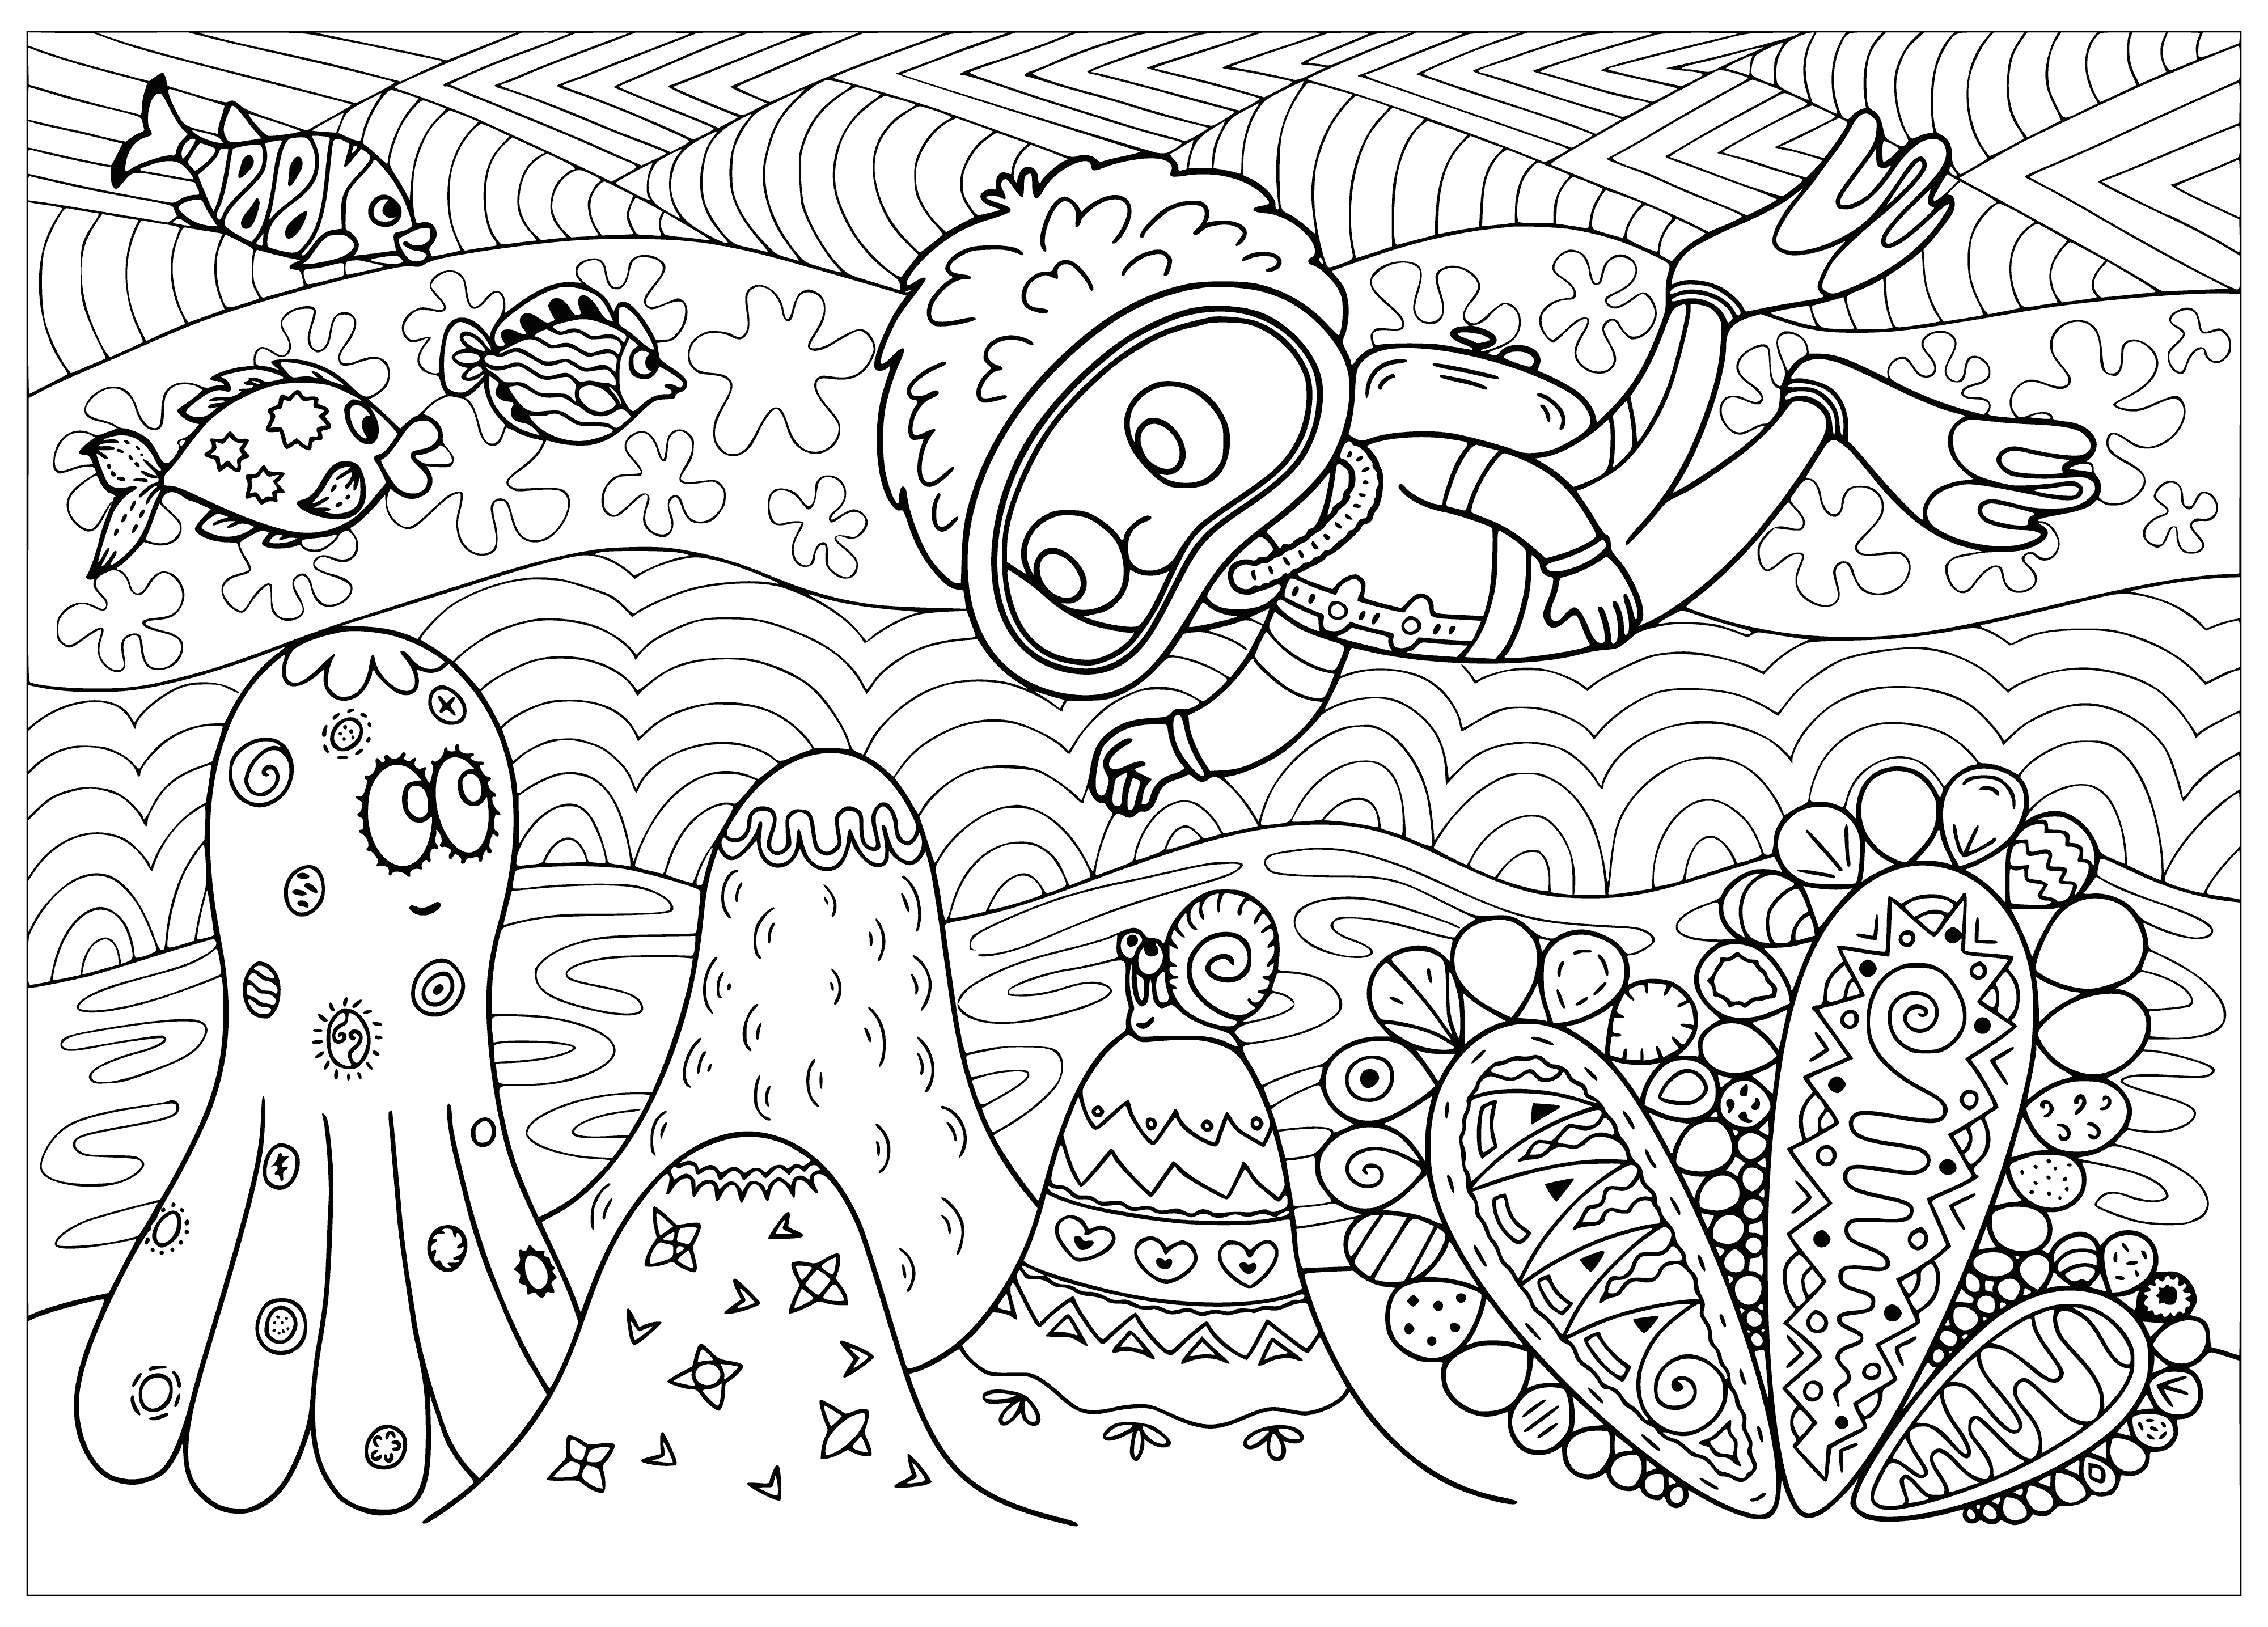 coloring page: Scuba diver surrounded by beautiful fish and coral, creating a peaceful, calming scene under the sea.